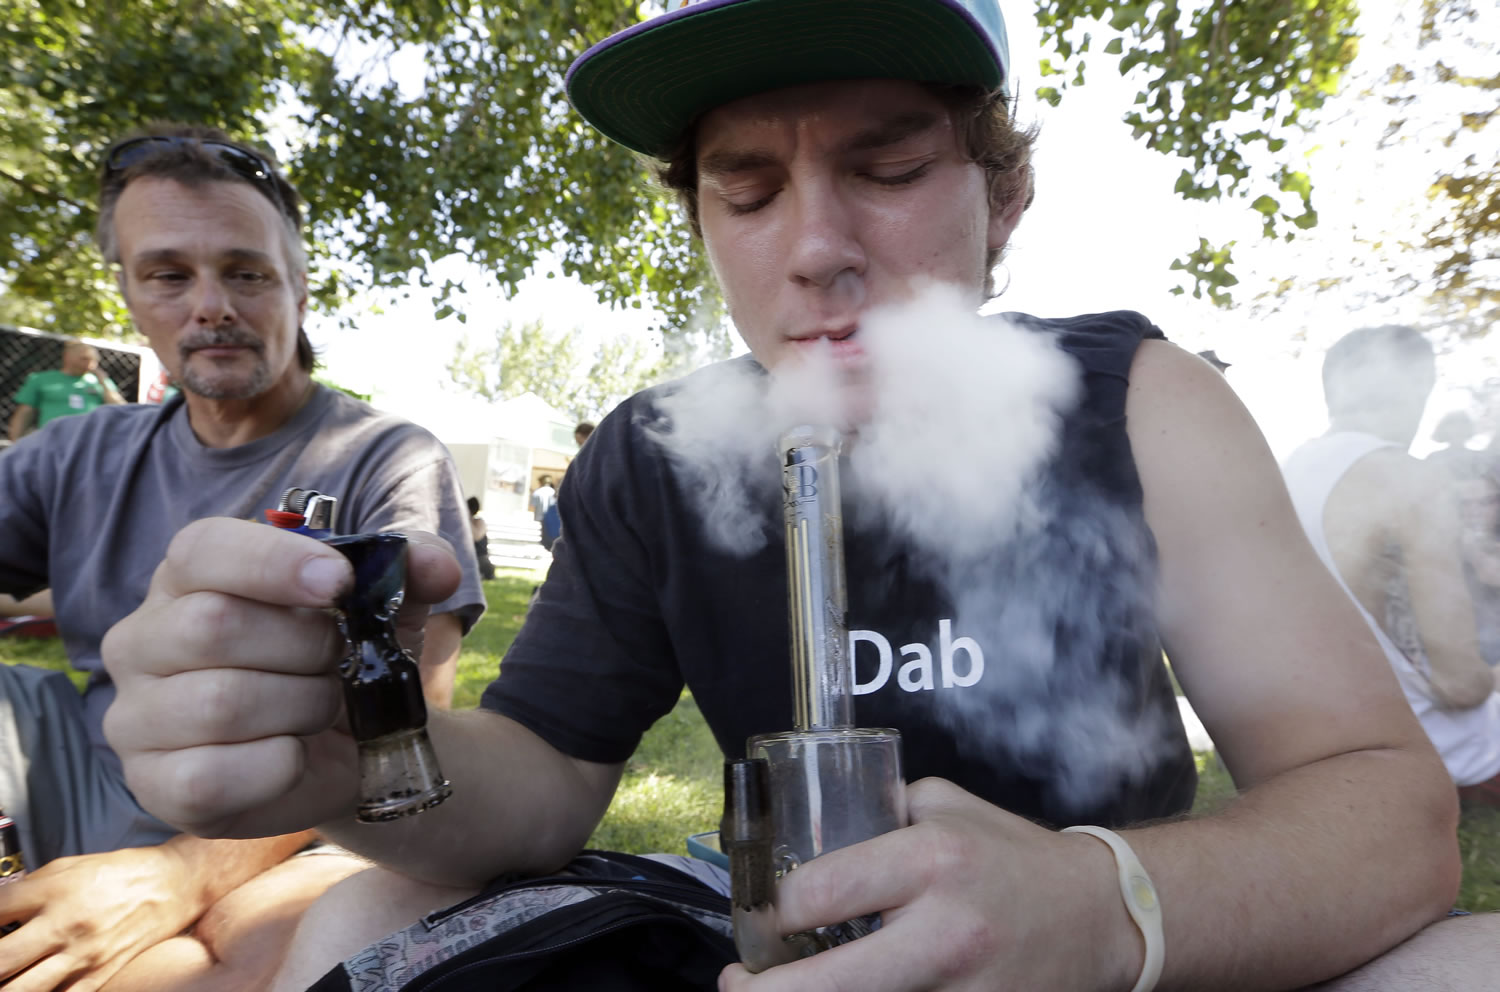 Files/Associated Press
Cody Park exhales a cloud of marijuana smoke at Seattle's Hempfest in 2013. It's not yet clear whether legalization will bring more opportunities for research into the plant's effects or medicinal value.